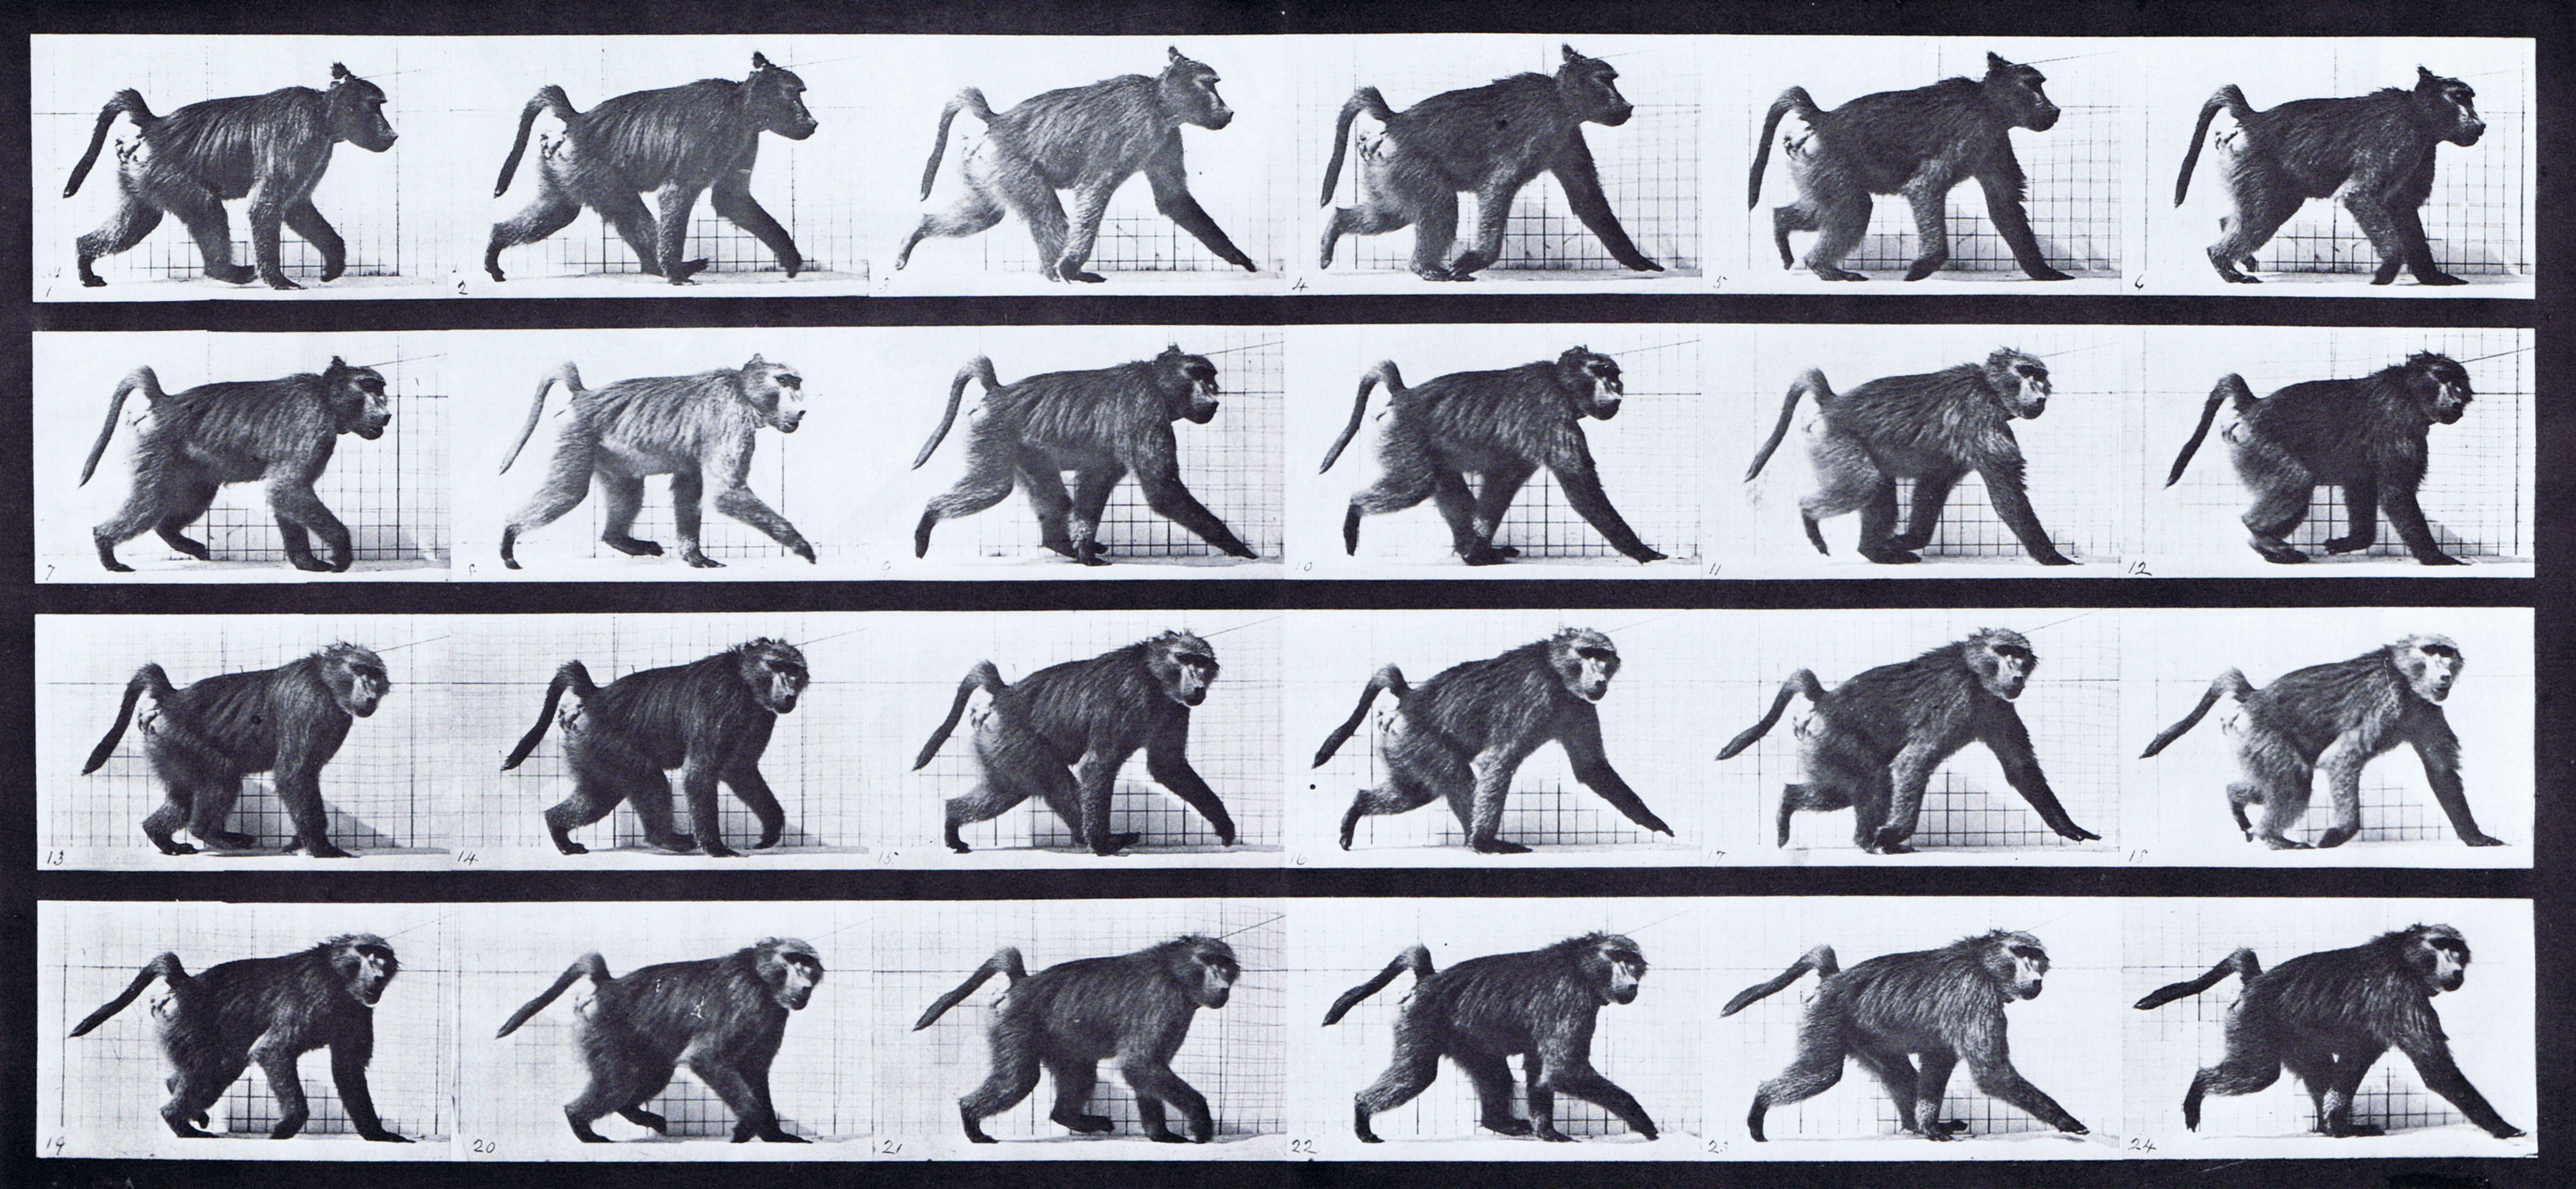 large profile view of baboon walking on all fours animation reference using muybridge plate 748 from animal locomotion